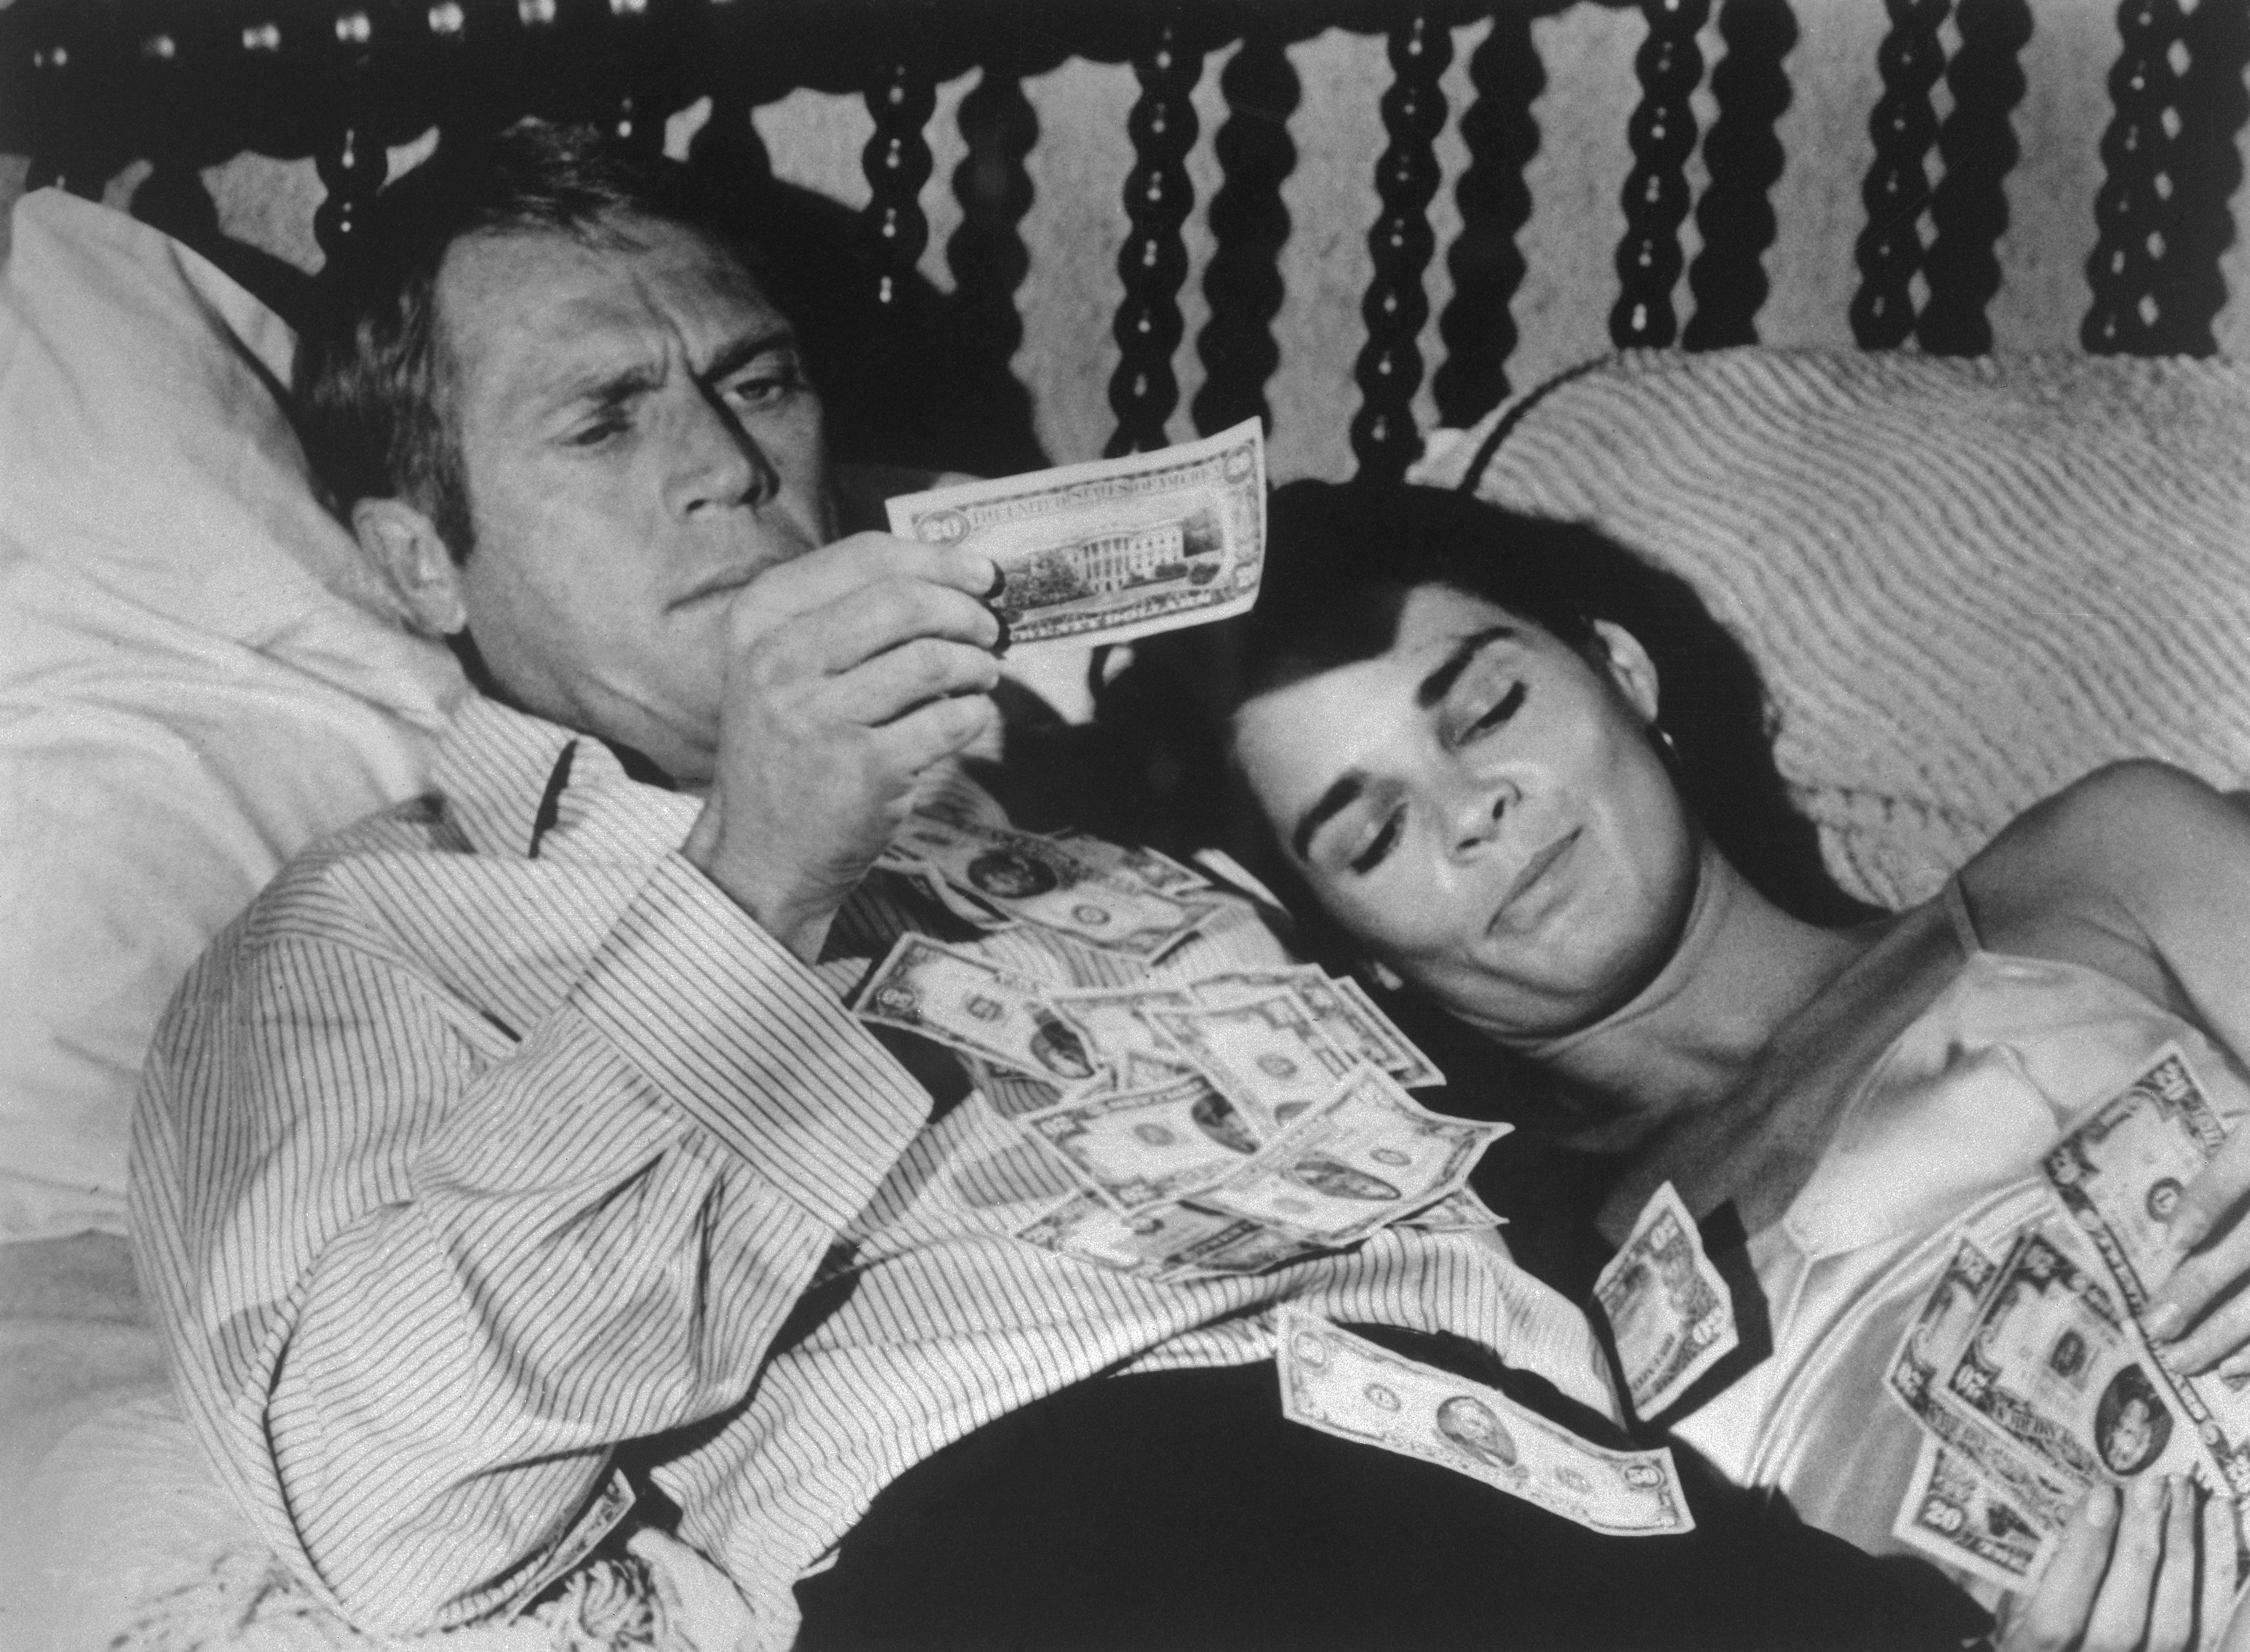 Steve McQueen and Ali MacGraw in "The Getaway" in 1972 | Source: Getty Images